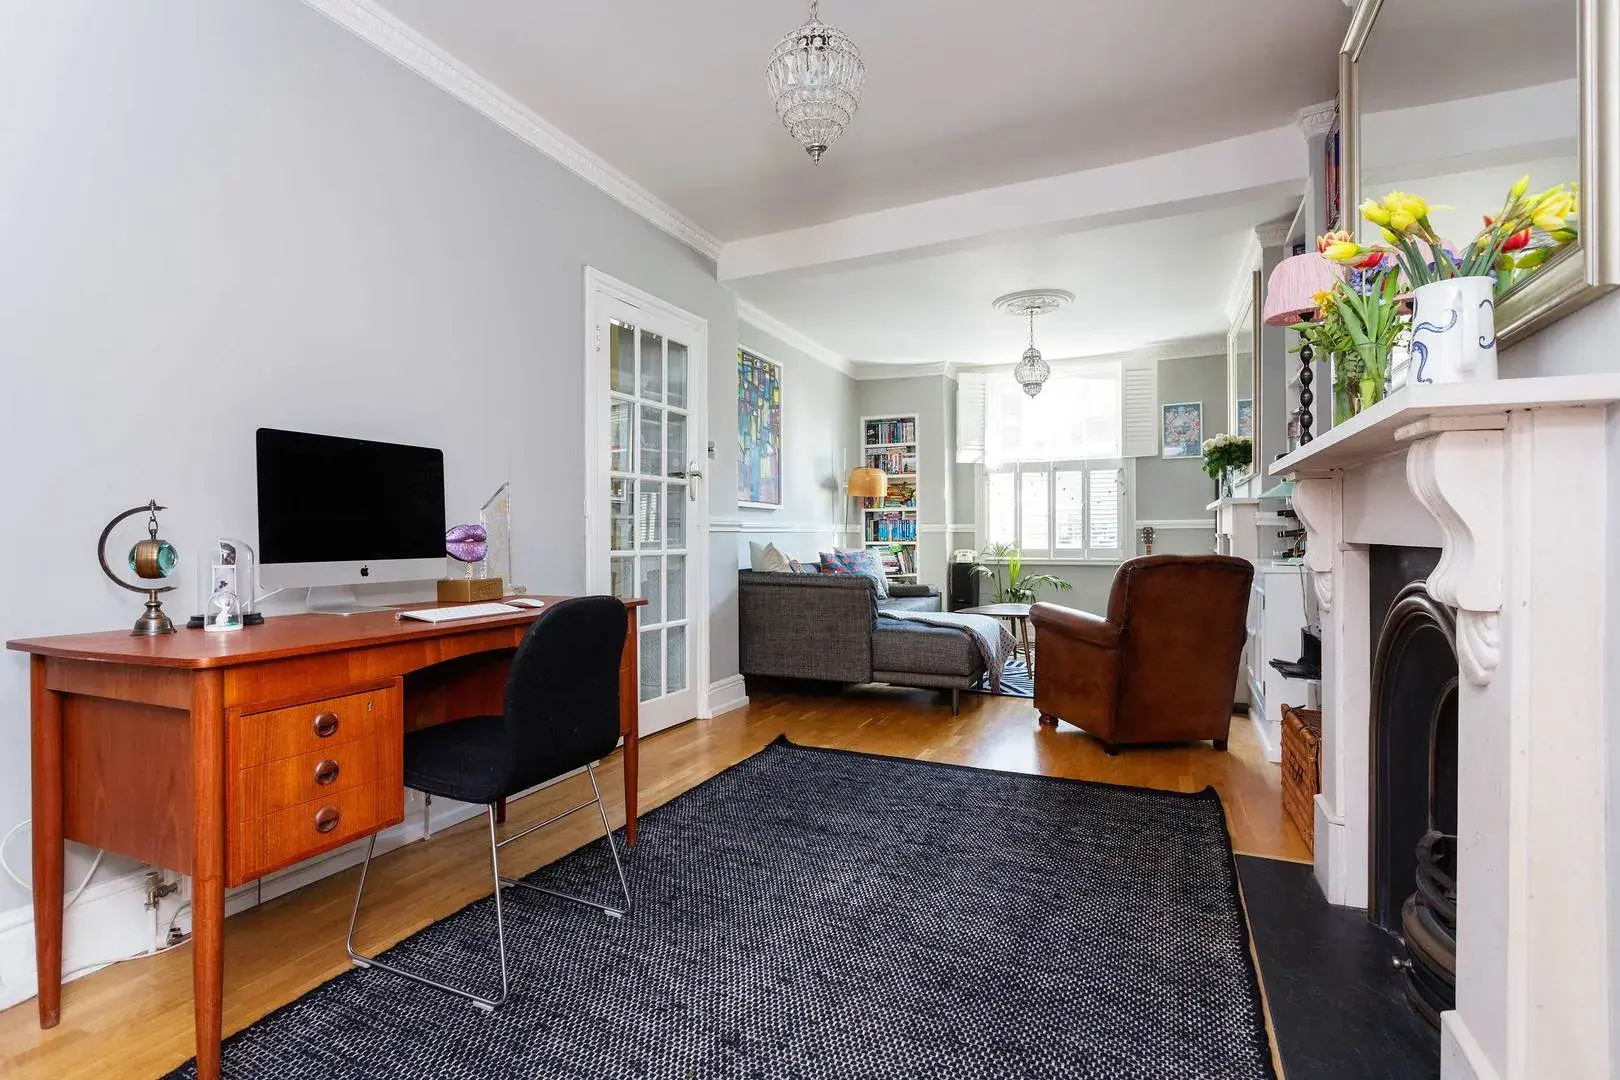 Baring Street, holiday home in Islington, London